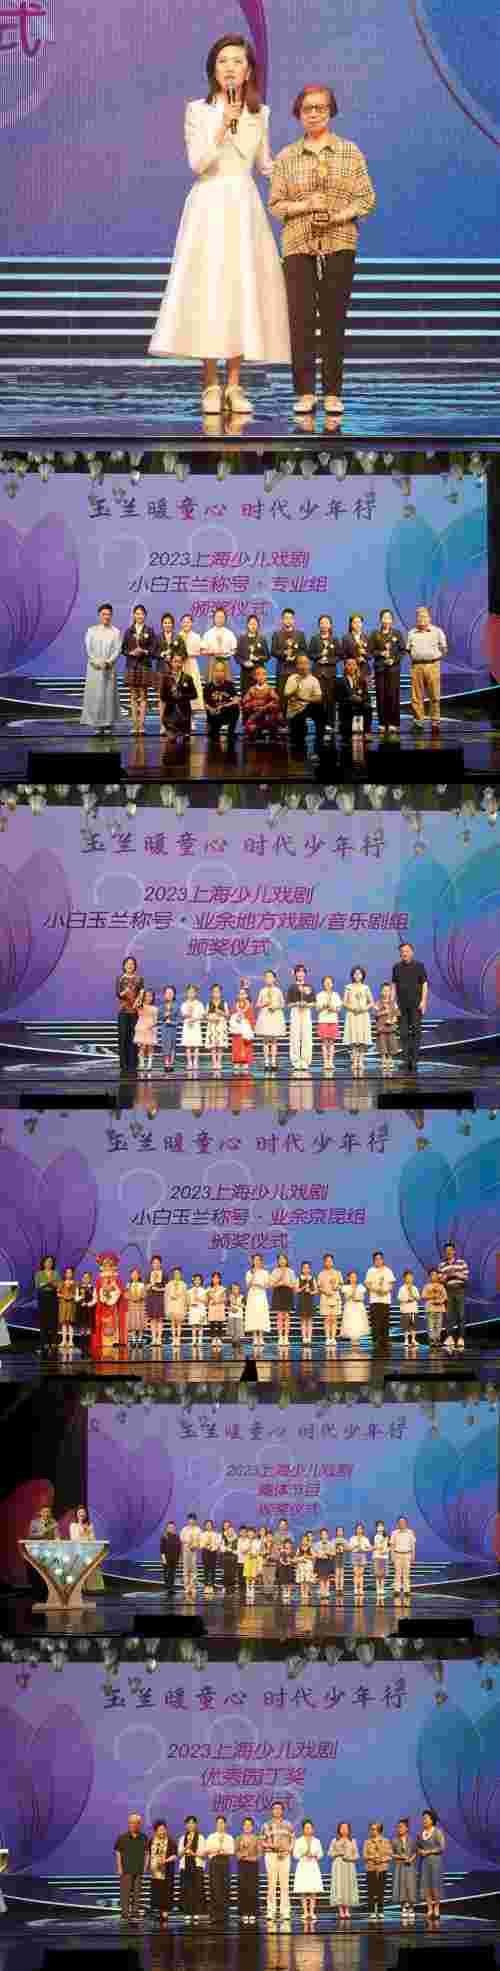 This event embodies the hard work of many people, with 6-year-old "Little Magnolia" and 87-year-old "Excellent Gardener" Yueju Opera | title | event